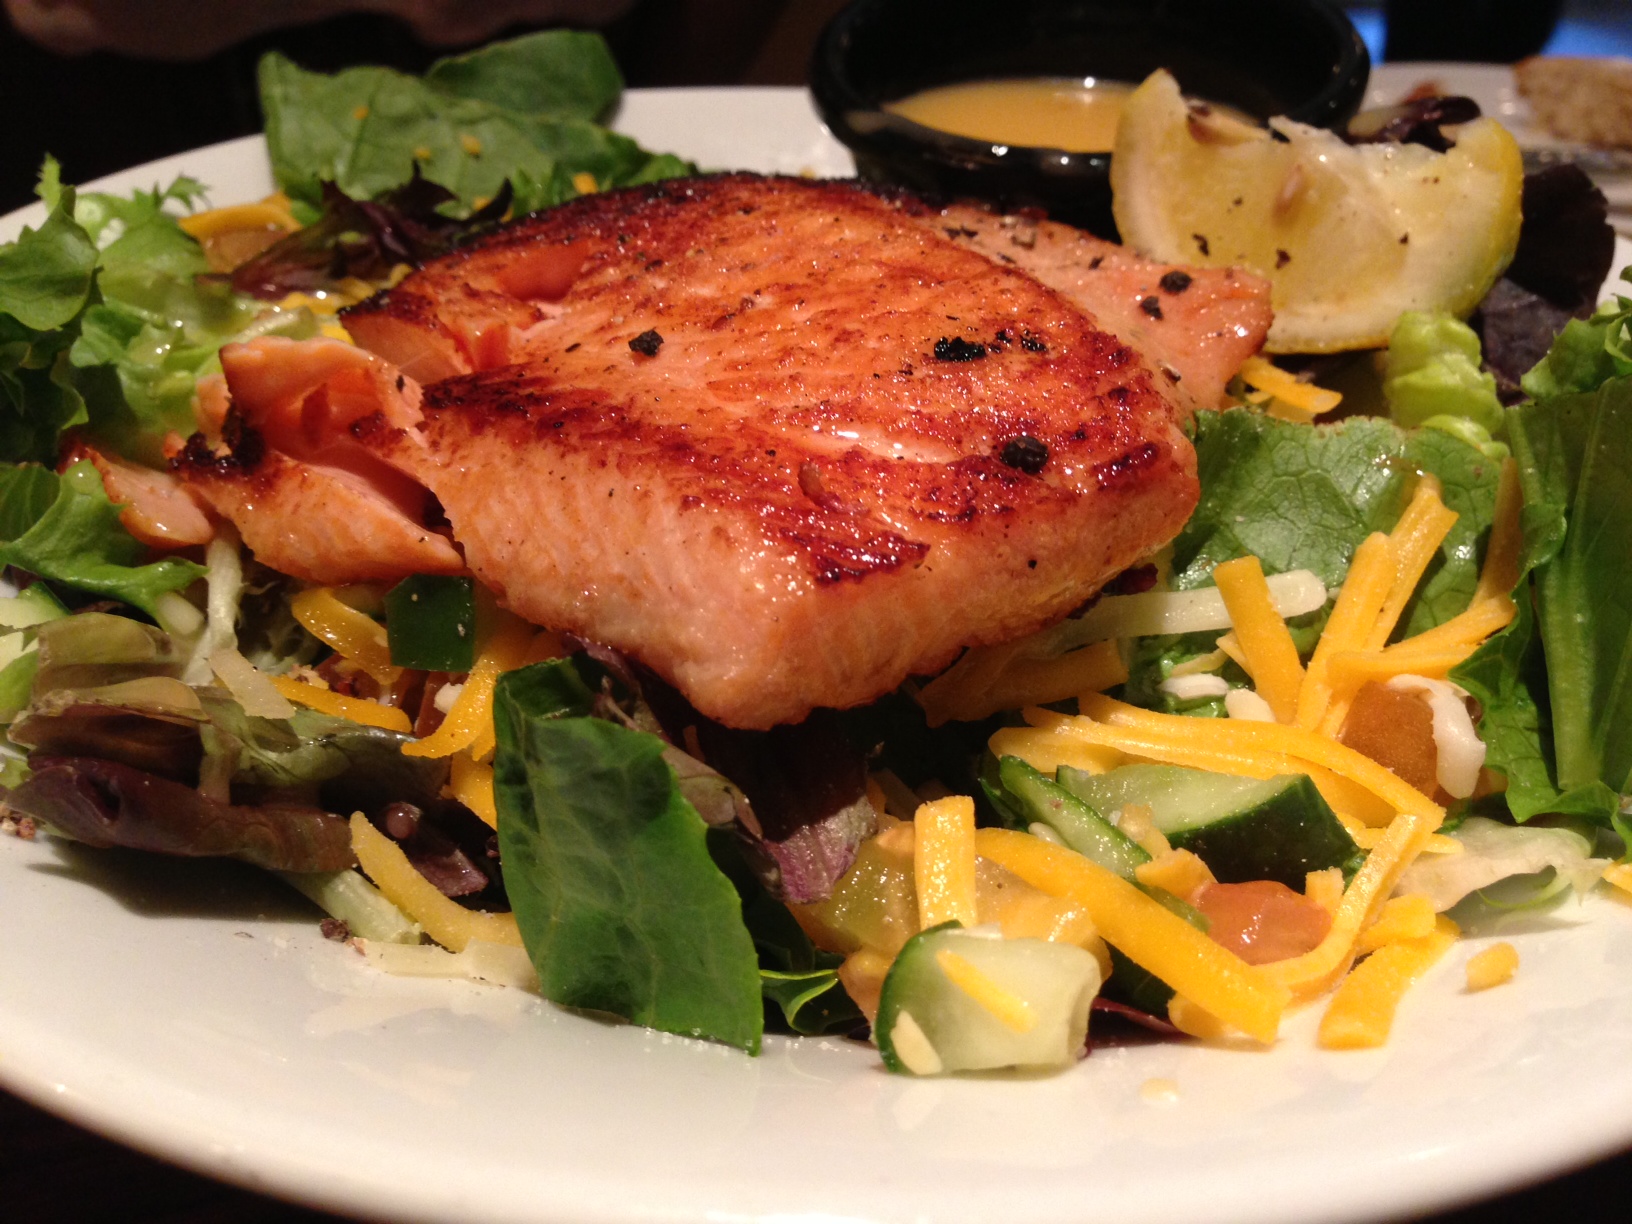 Grilled salmon over a bed of salad